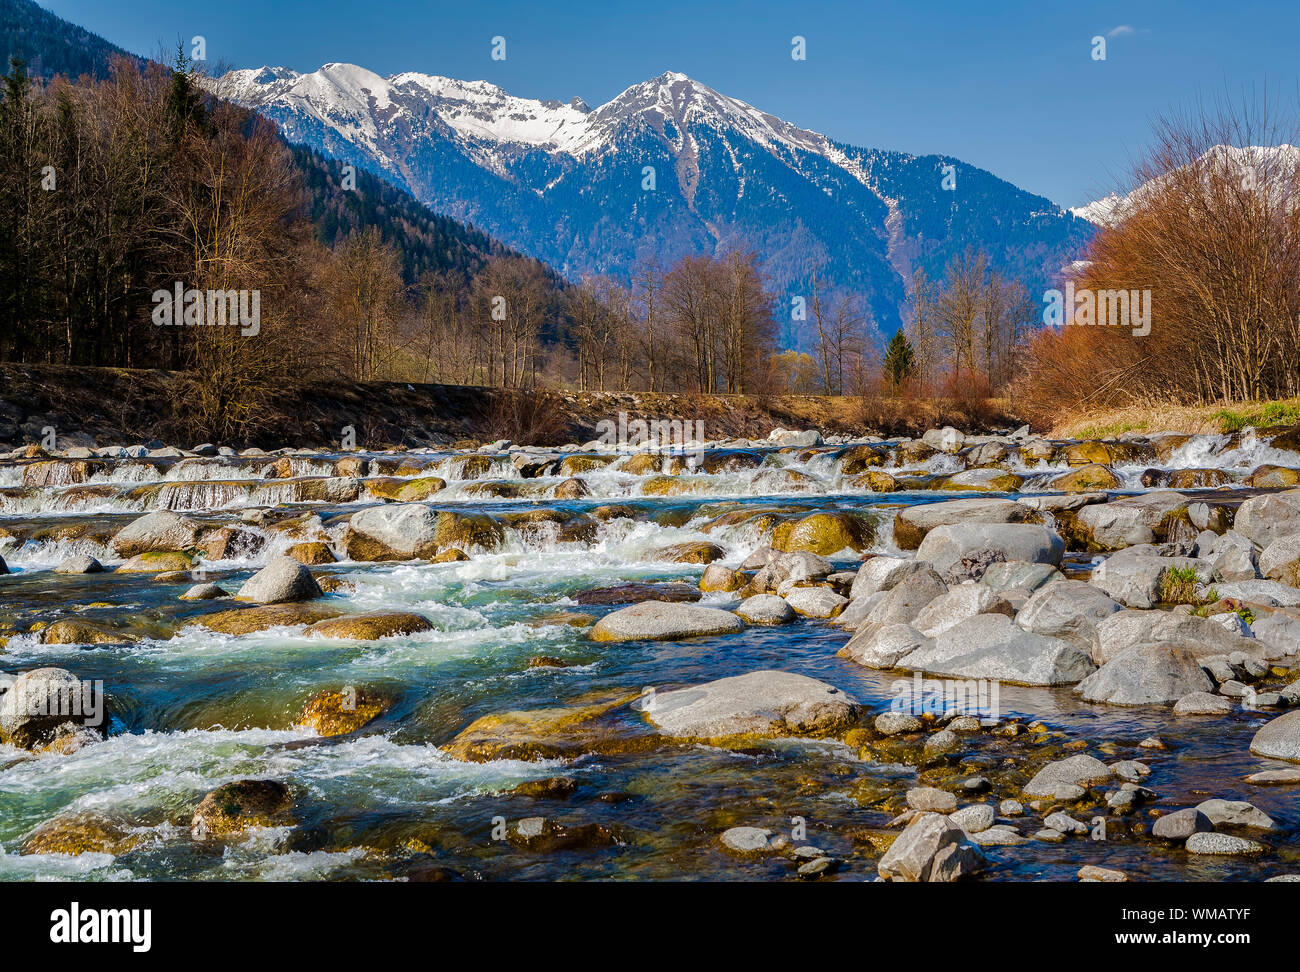 landscape with mountains trees and rocky river. Pinzolo, Italy, Alps Stock Photo